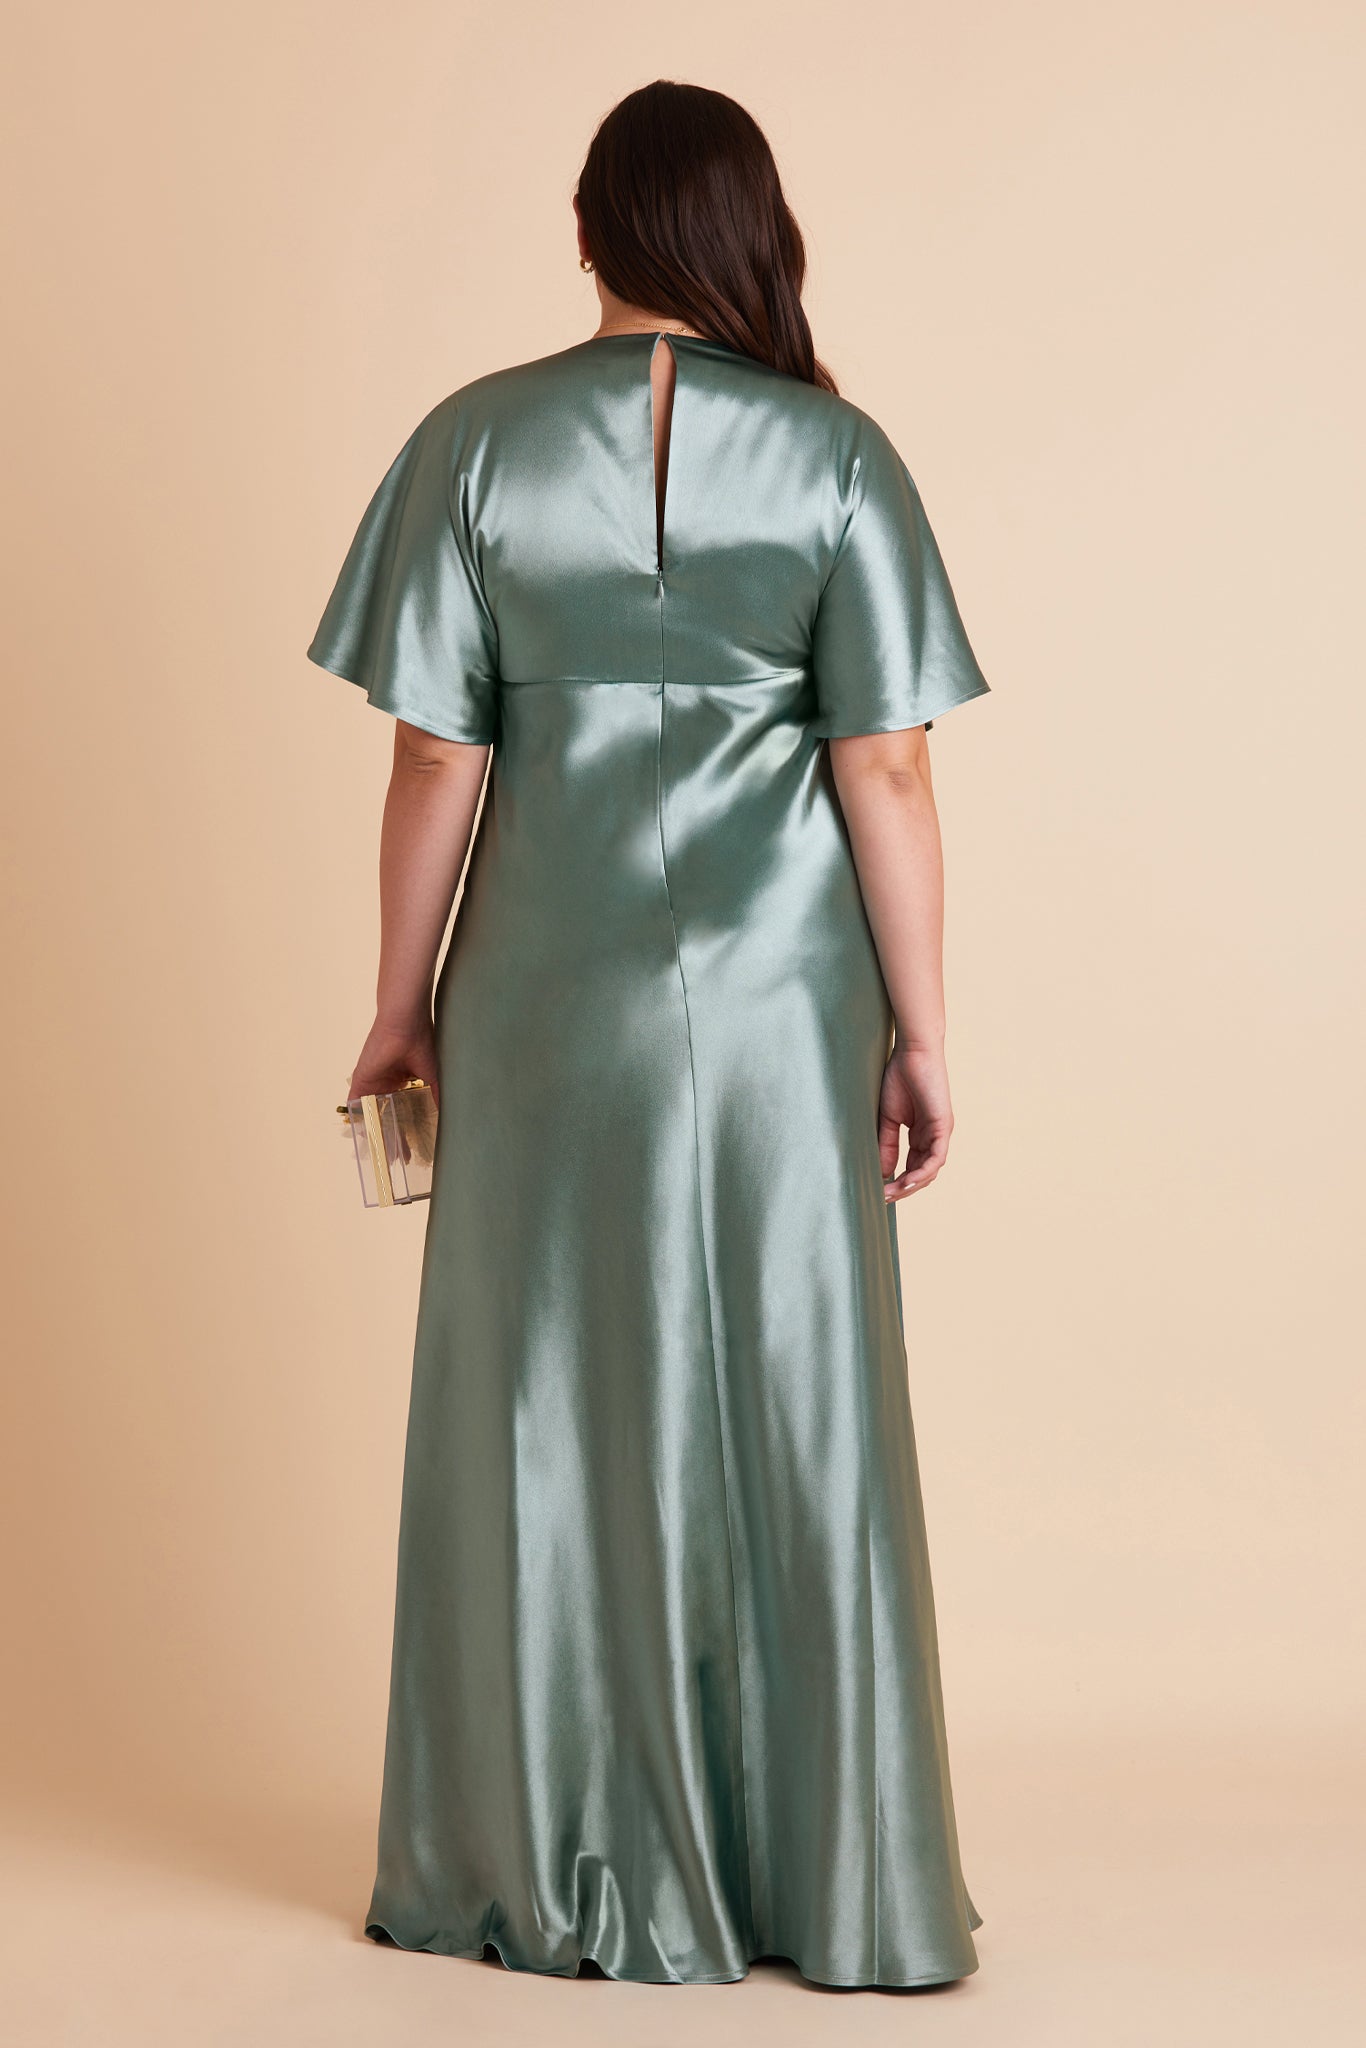 Jesse plus size bridesmaid dress with slit in sea glass green satin by Birdy Grey, back view